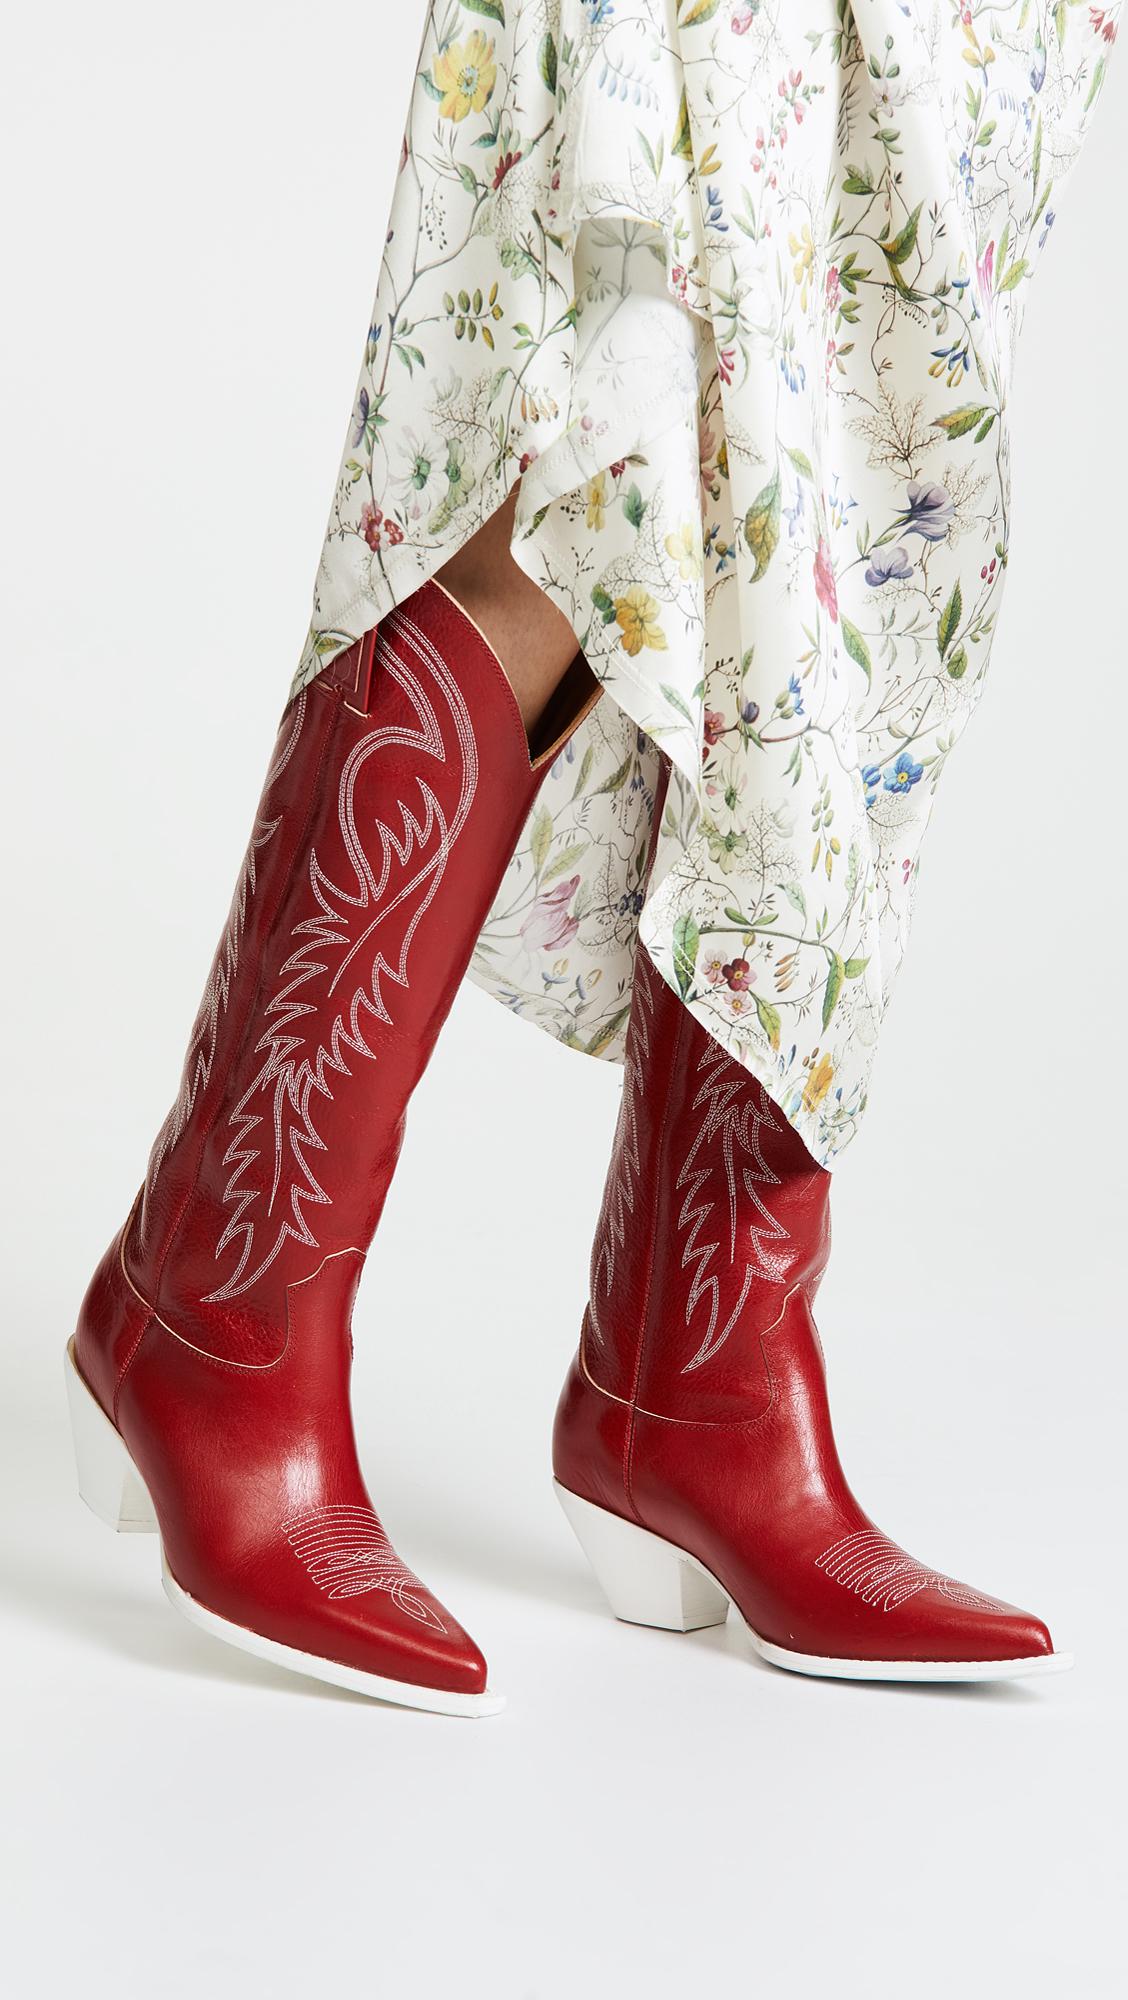 R13 Leather Pointed Cowboy Boots in Red/White (Red) - Lyst